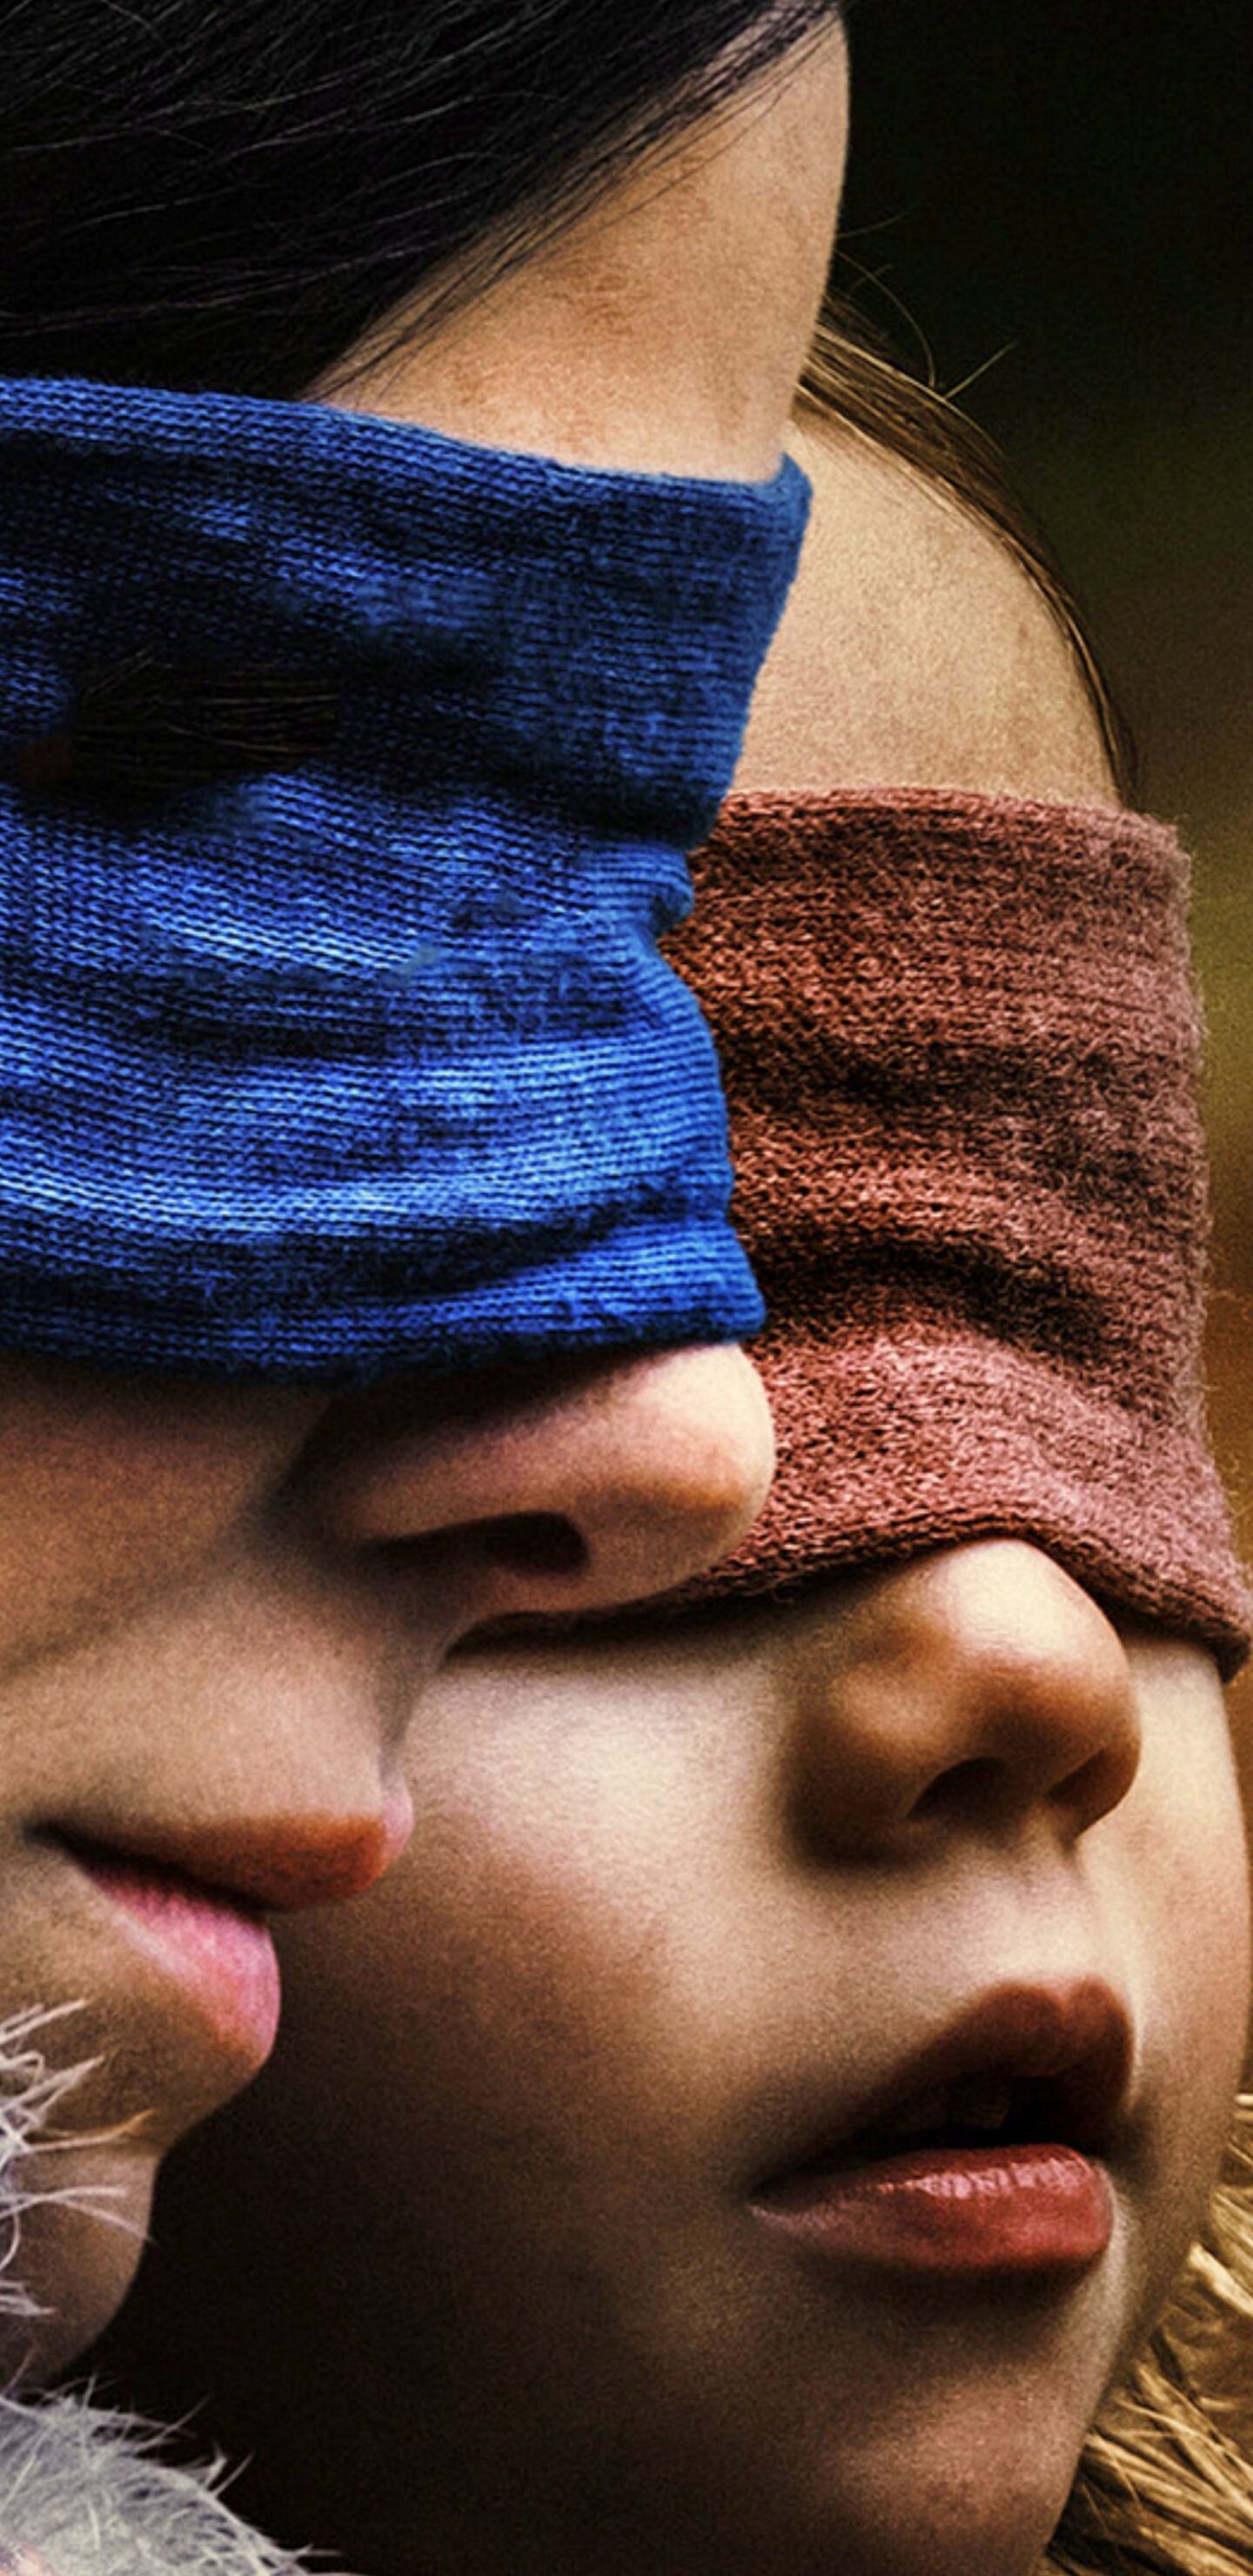 Bird Box (Movie 2018): Blindfolded Sandra Bullock and Vivien Lyra Blair, Characters created by written by Eric Heisserer. 1440x2960 HD Background.